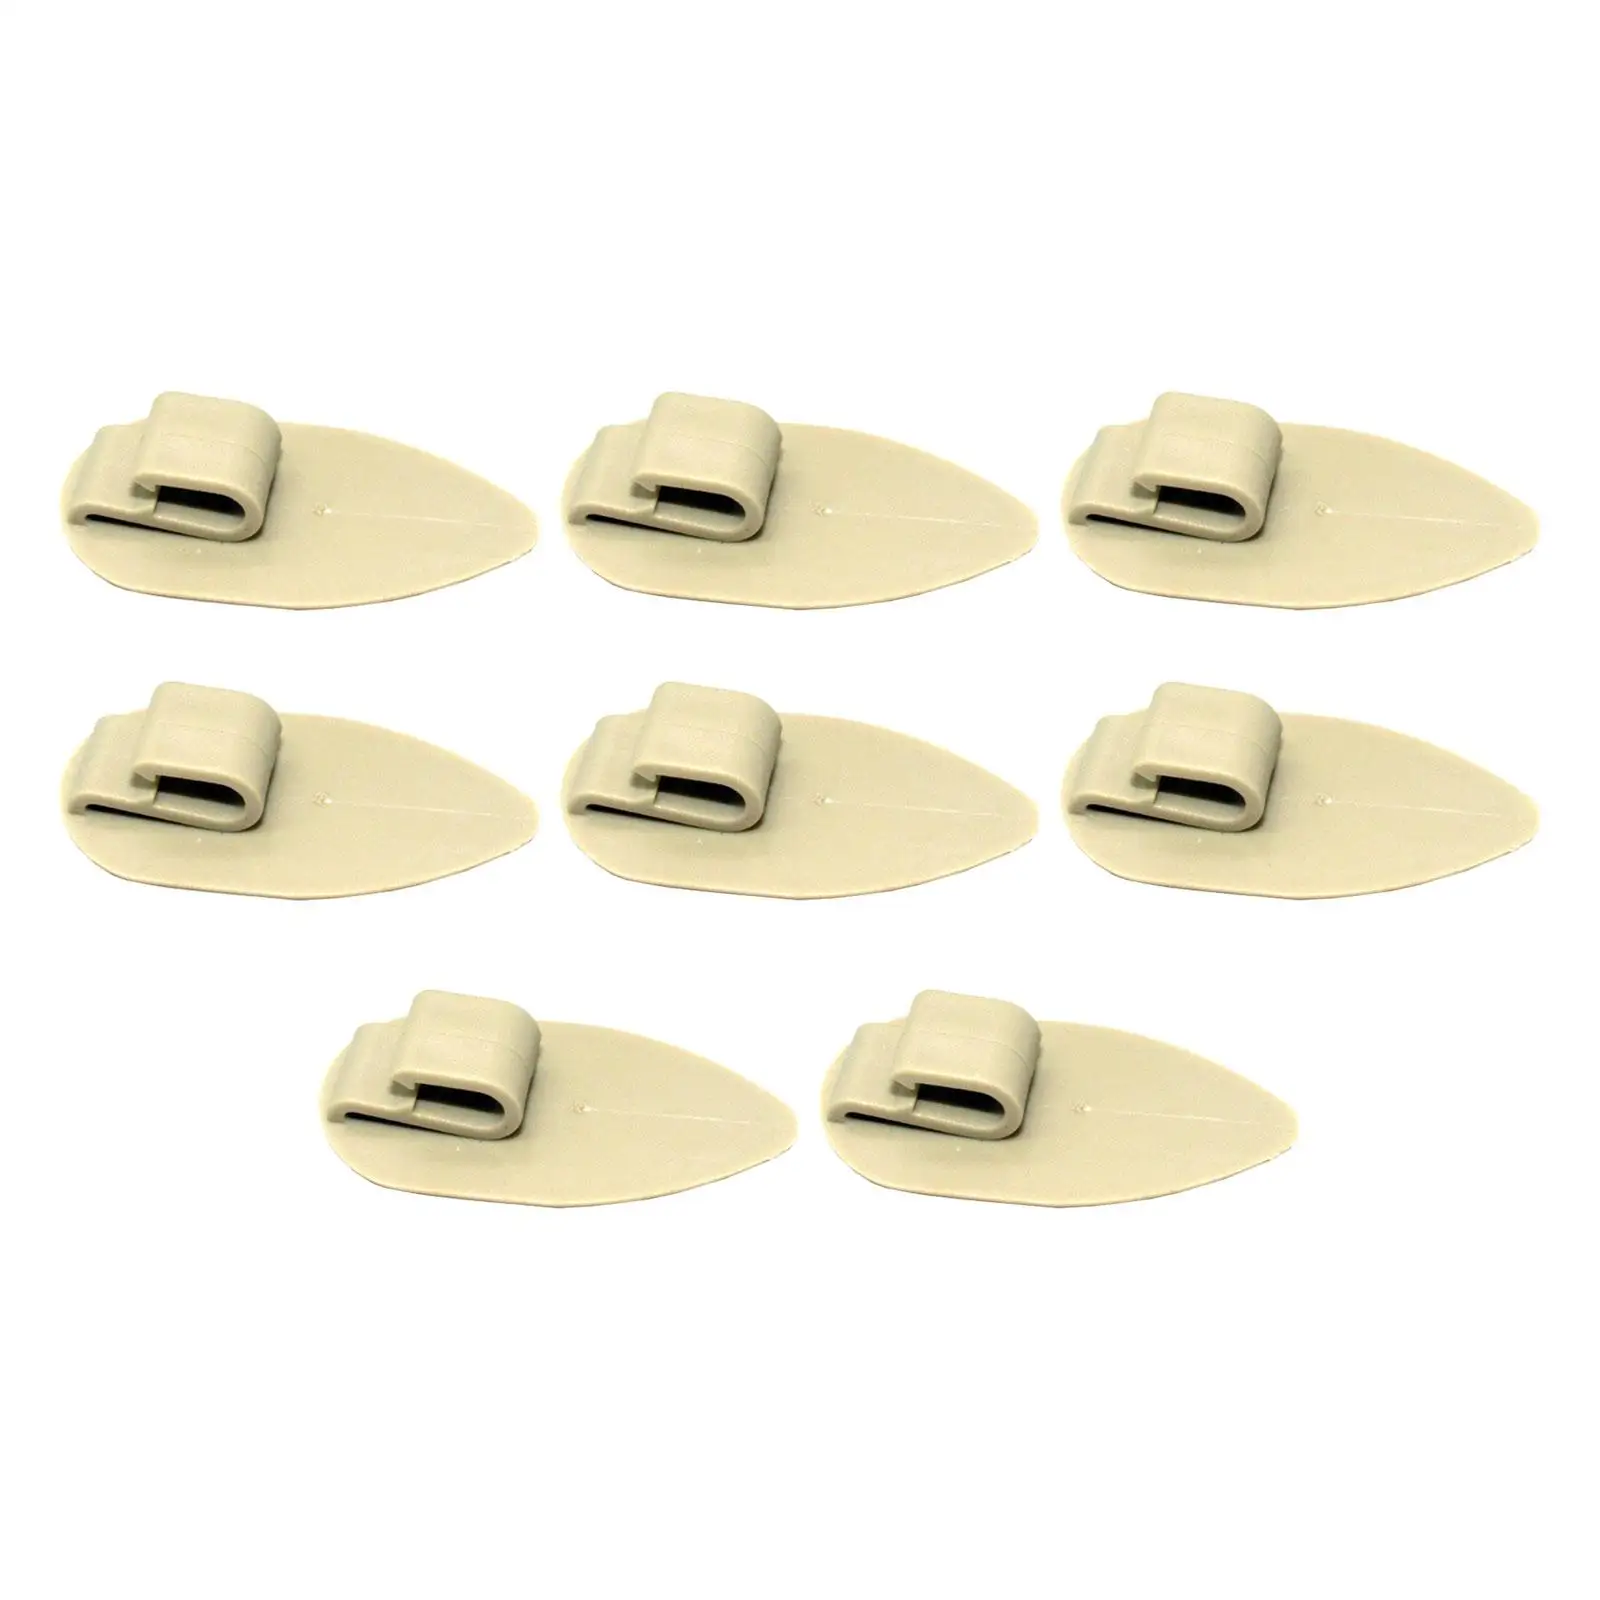 8Pcs Floor Mat Clips for Car Mats Universal Mat Fastener Clips for Car Mats Premium Replaces Professional Easy to Install